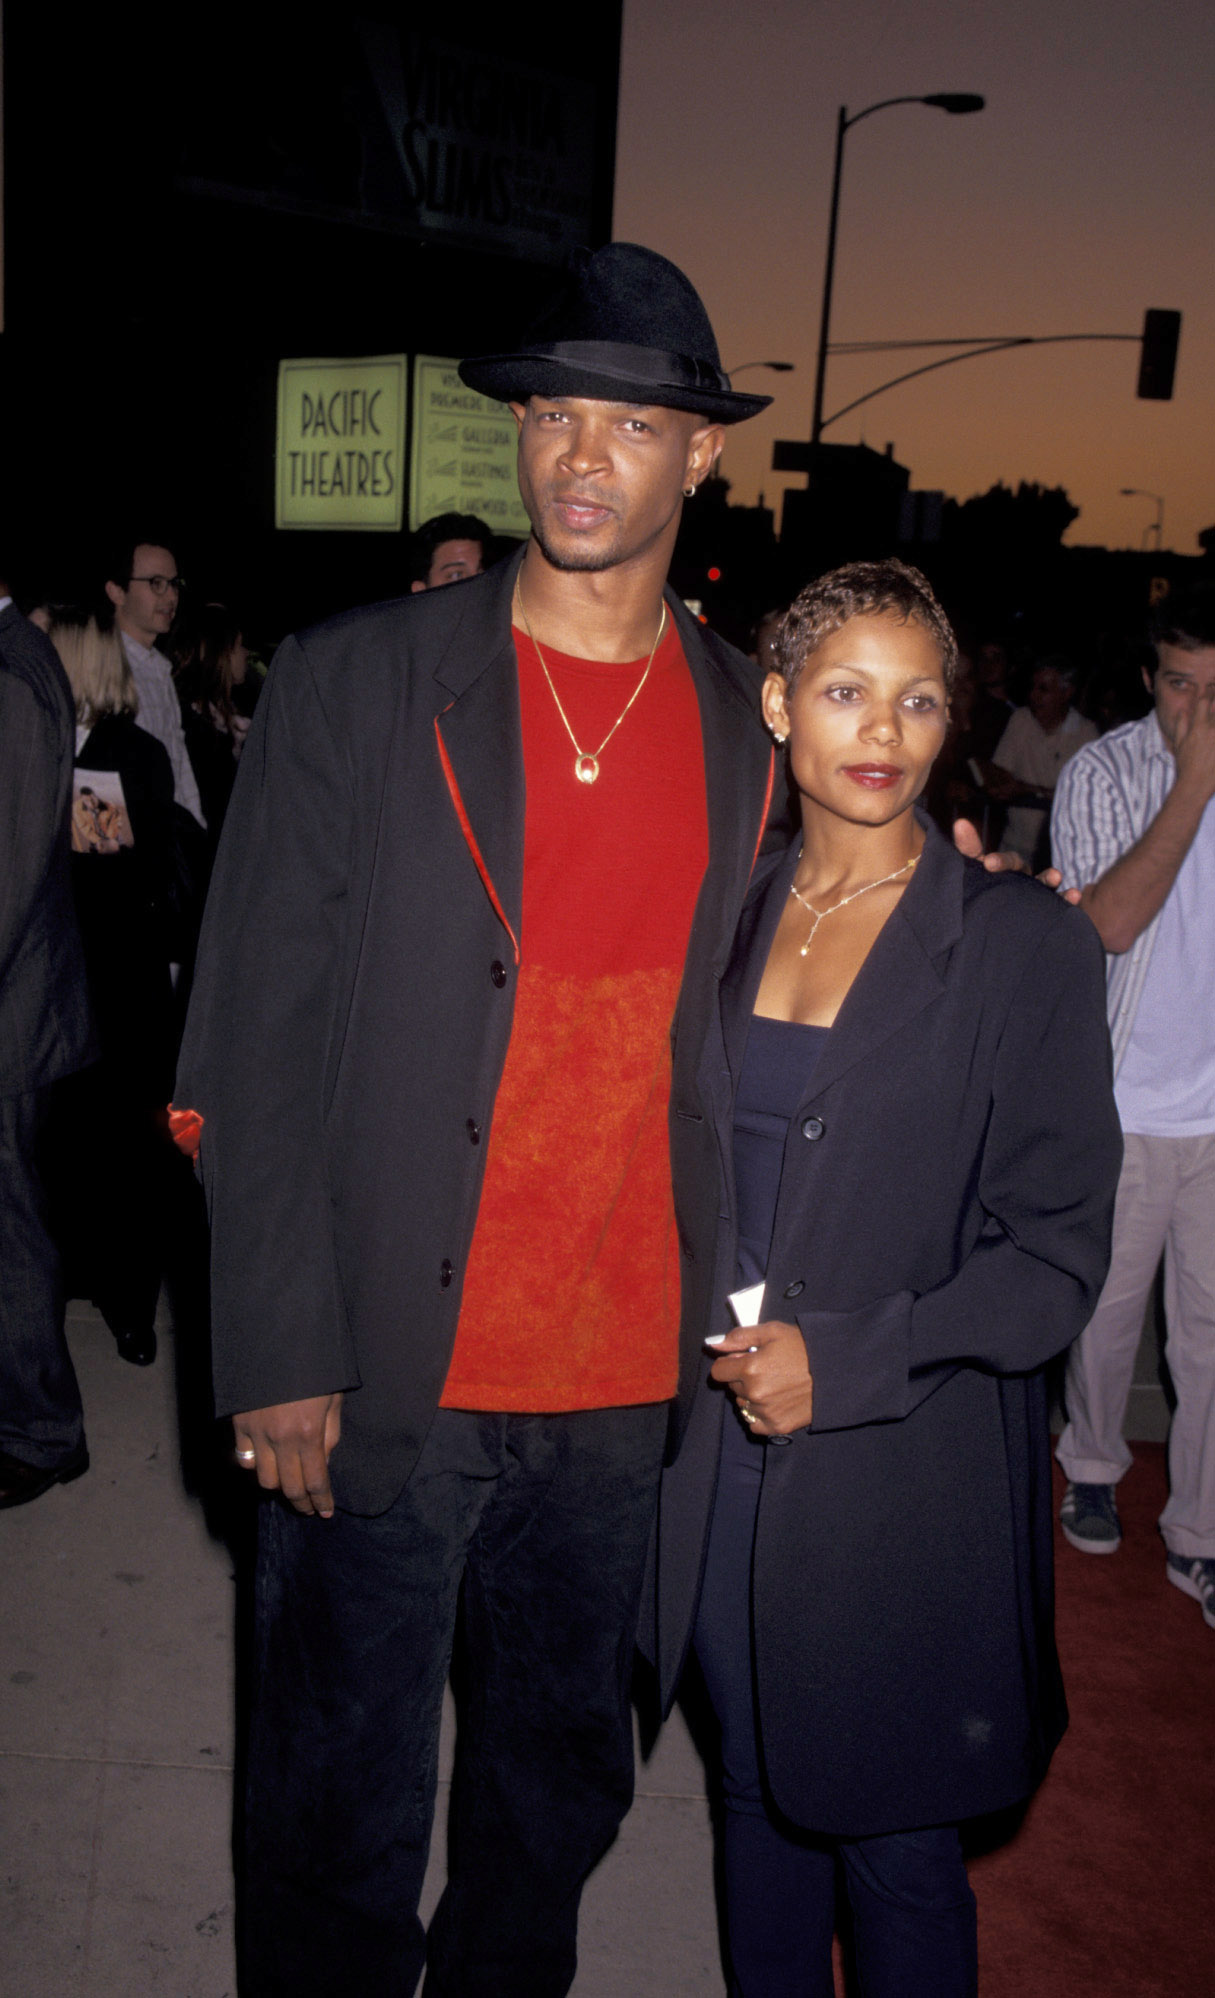 Actor Damon Wayans and wife Lisa Thorner on August 28 1996 | Source: Getty Images